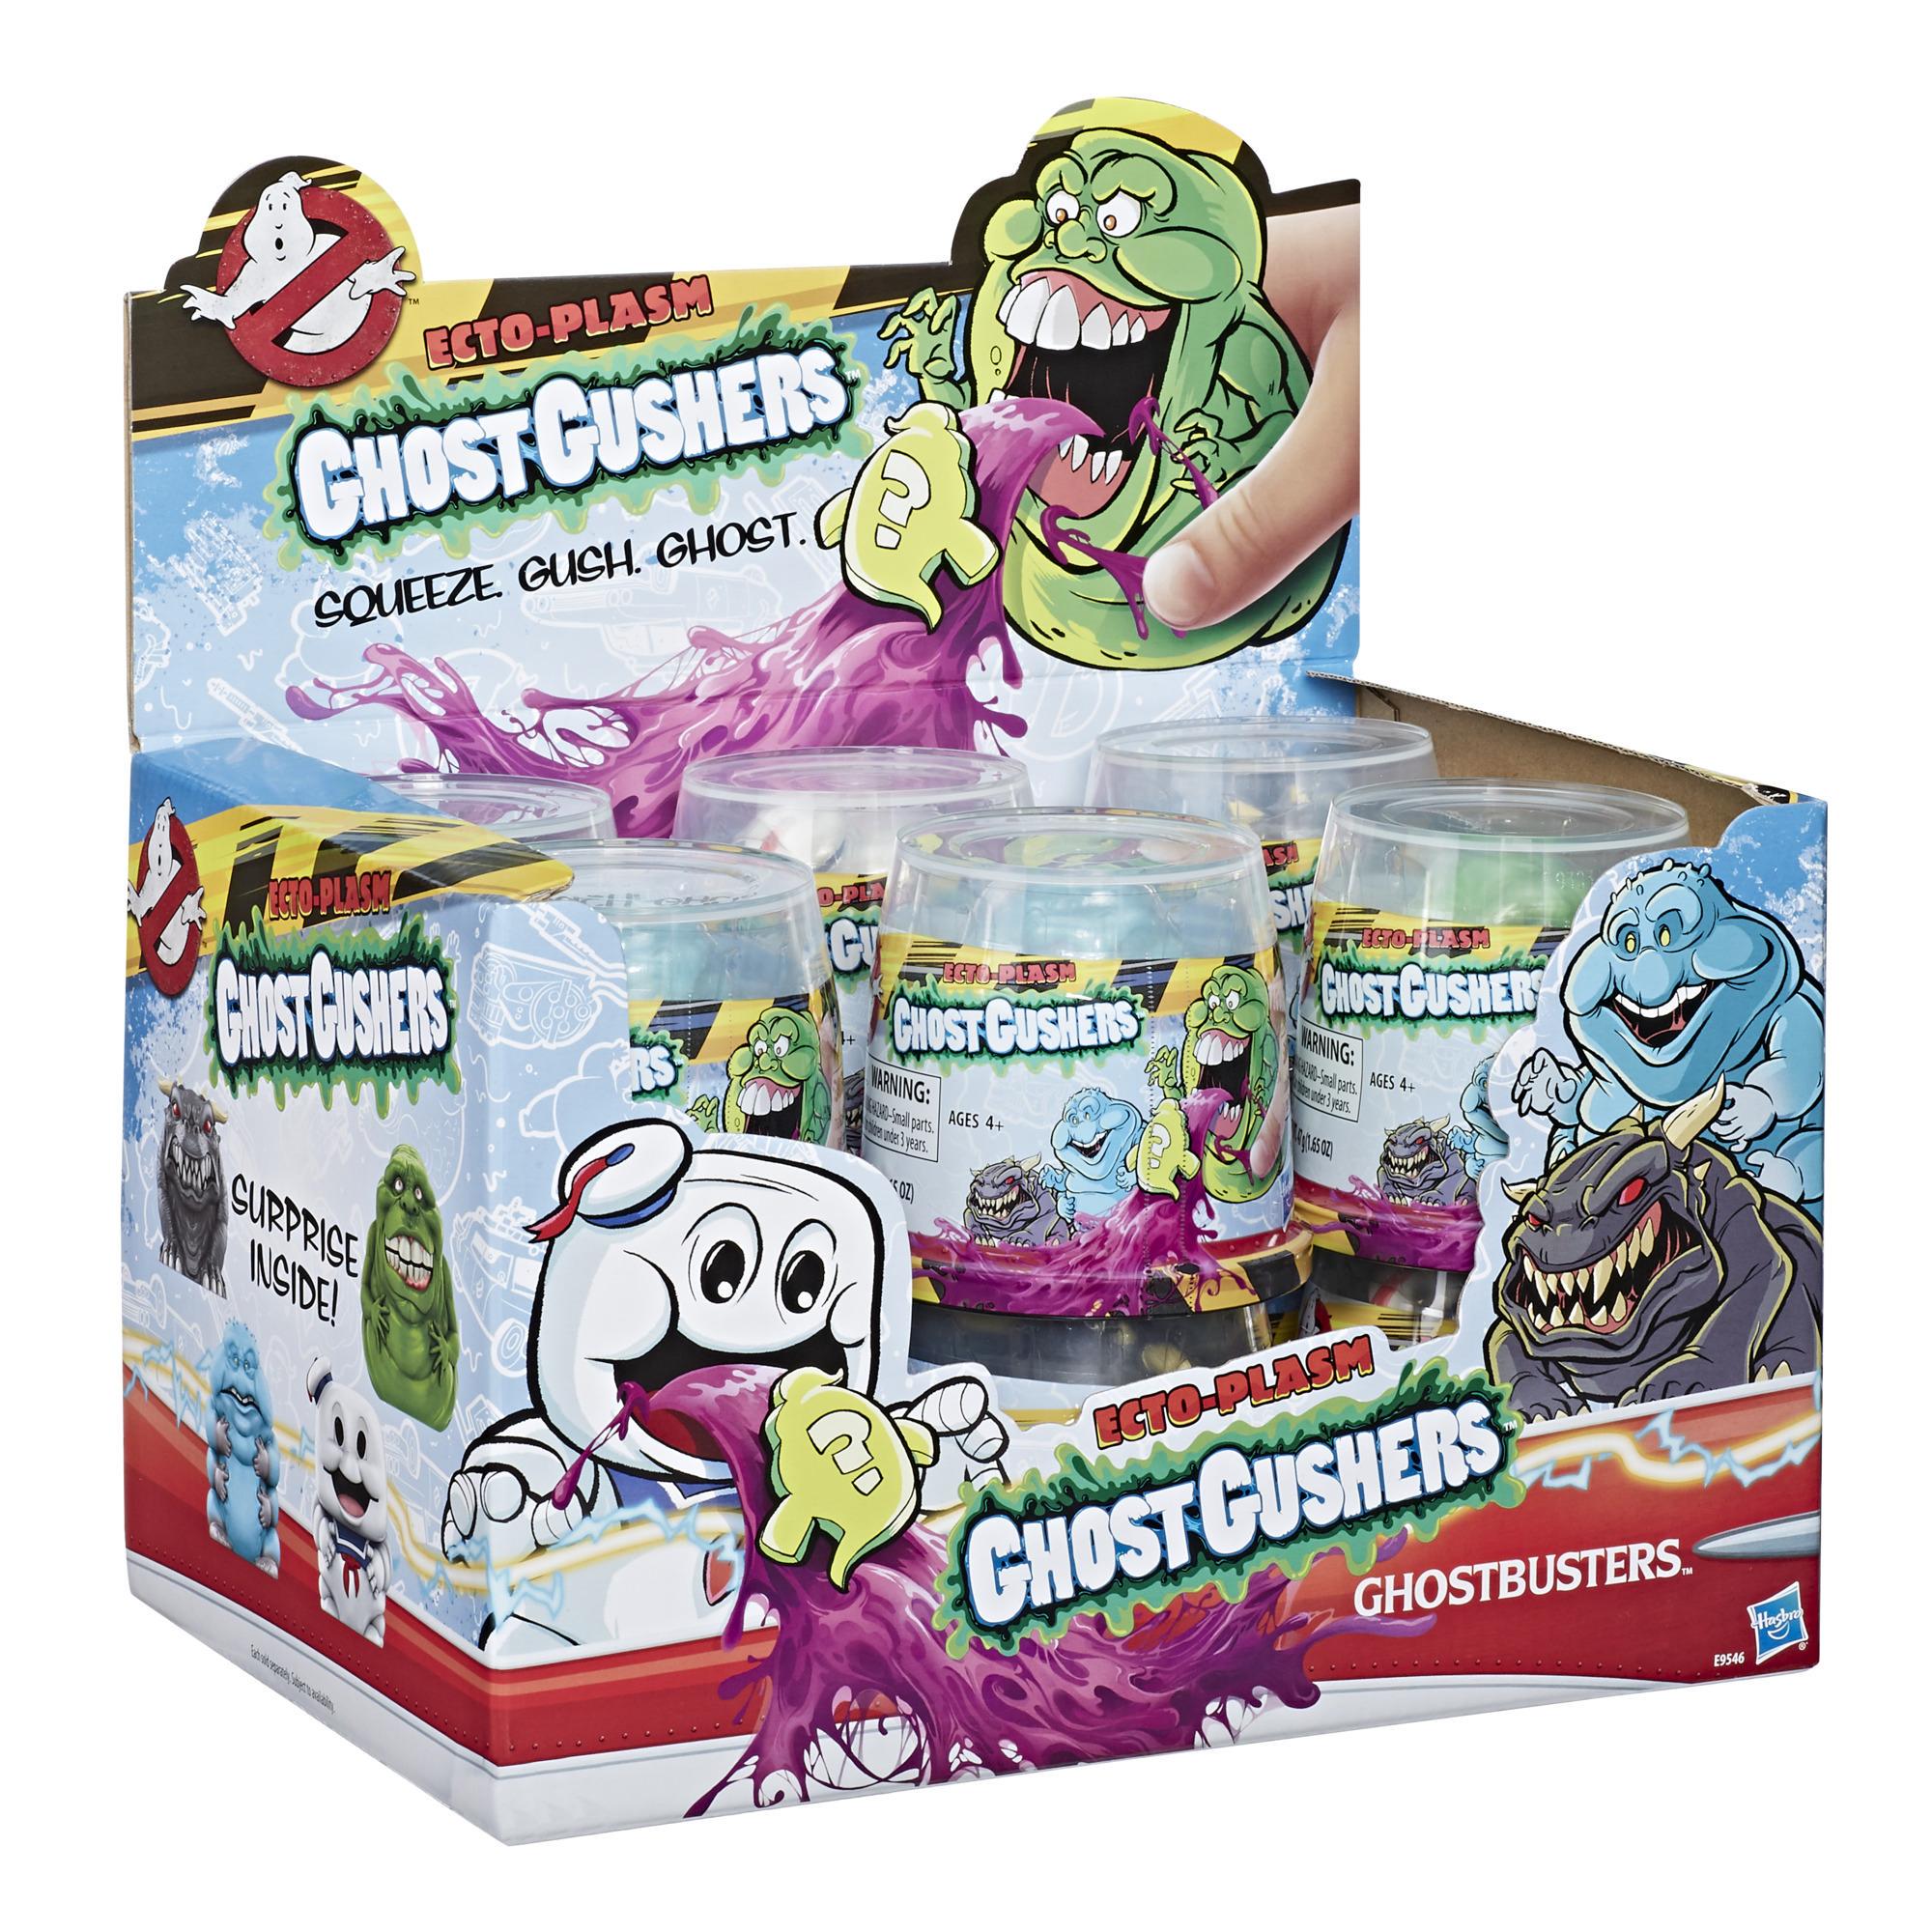 Ghostbusters, Ecto-Plasm Ghost Gushers product thumbnail 1